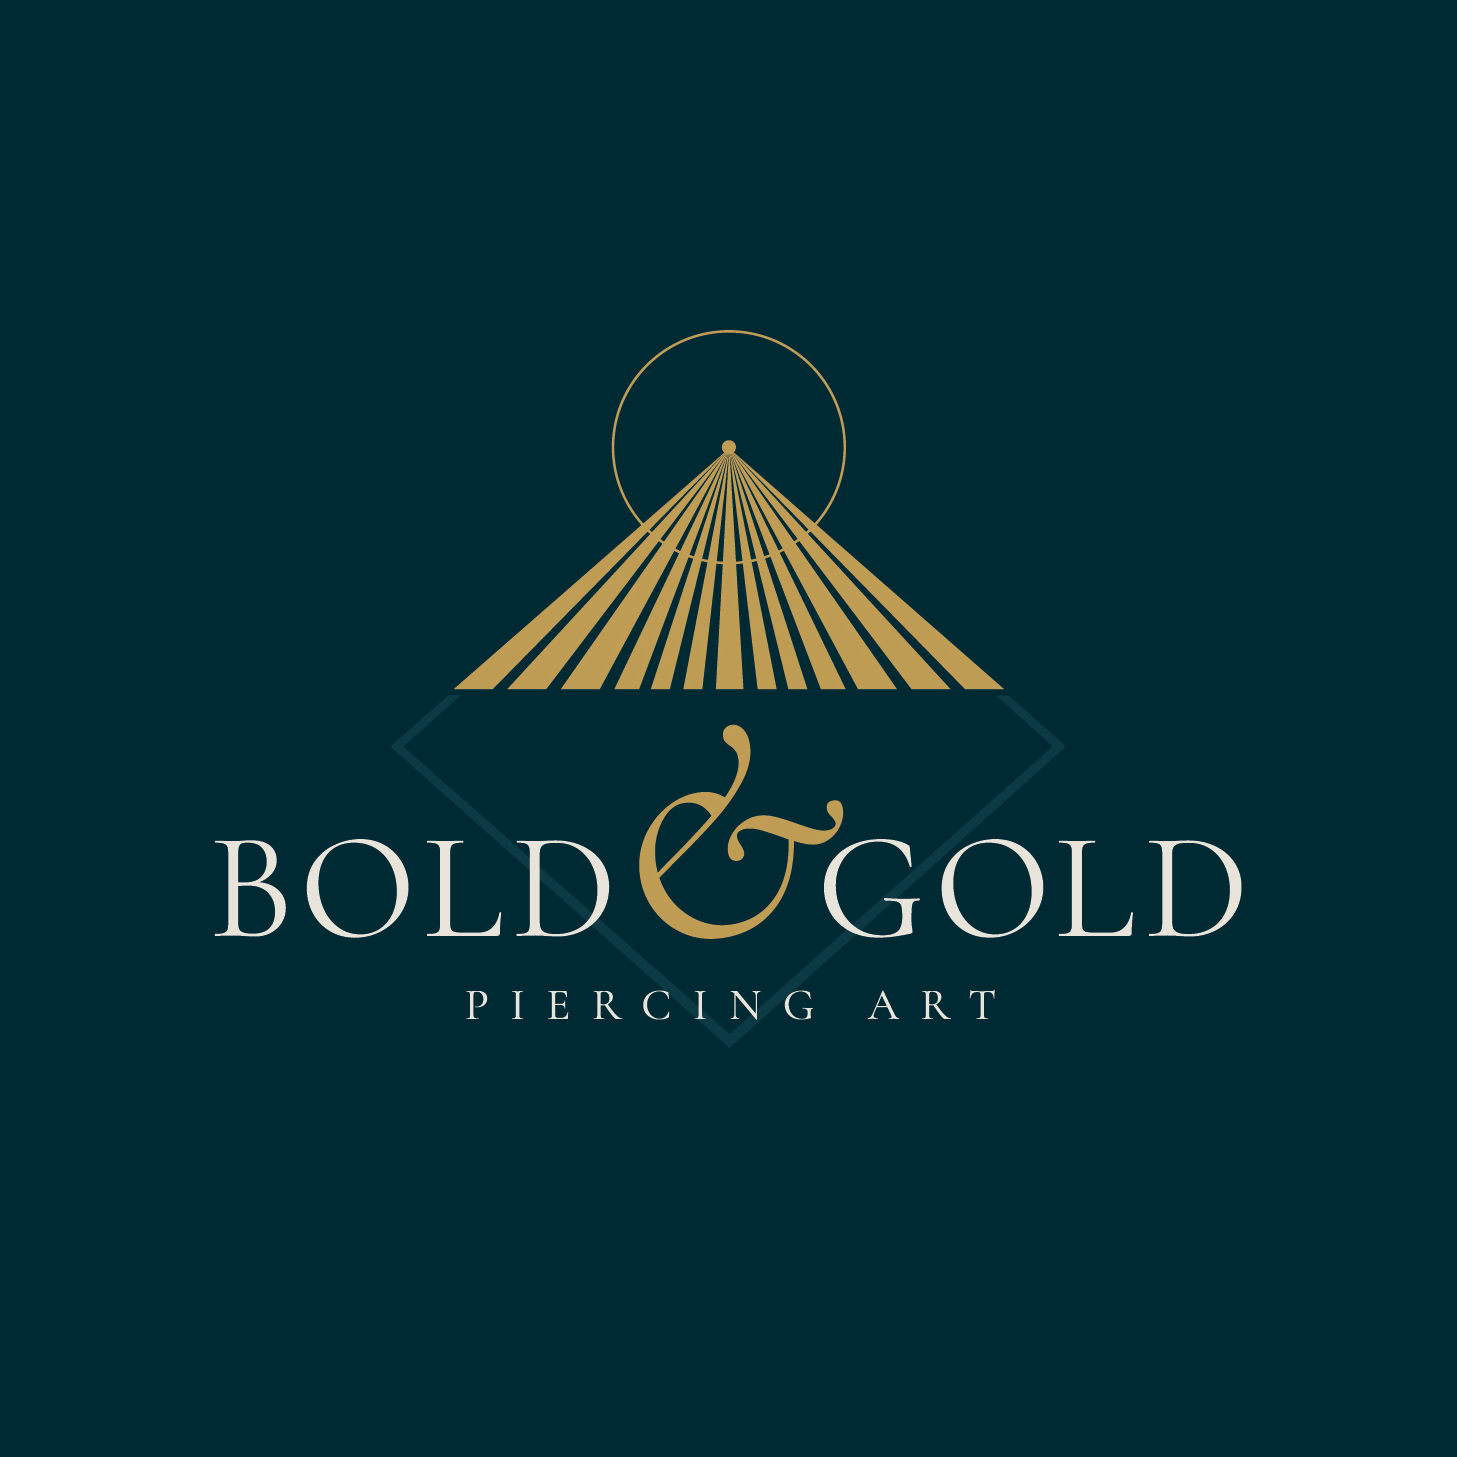 BOLD AND GOLD PIERCING ART logo